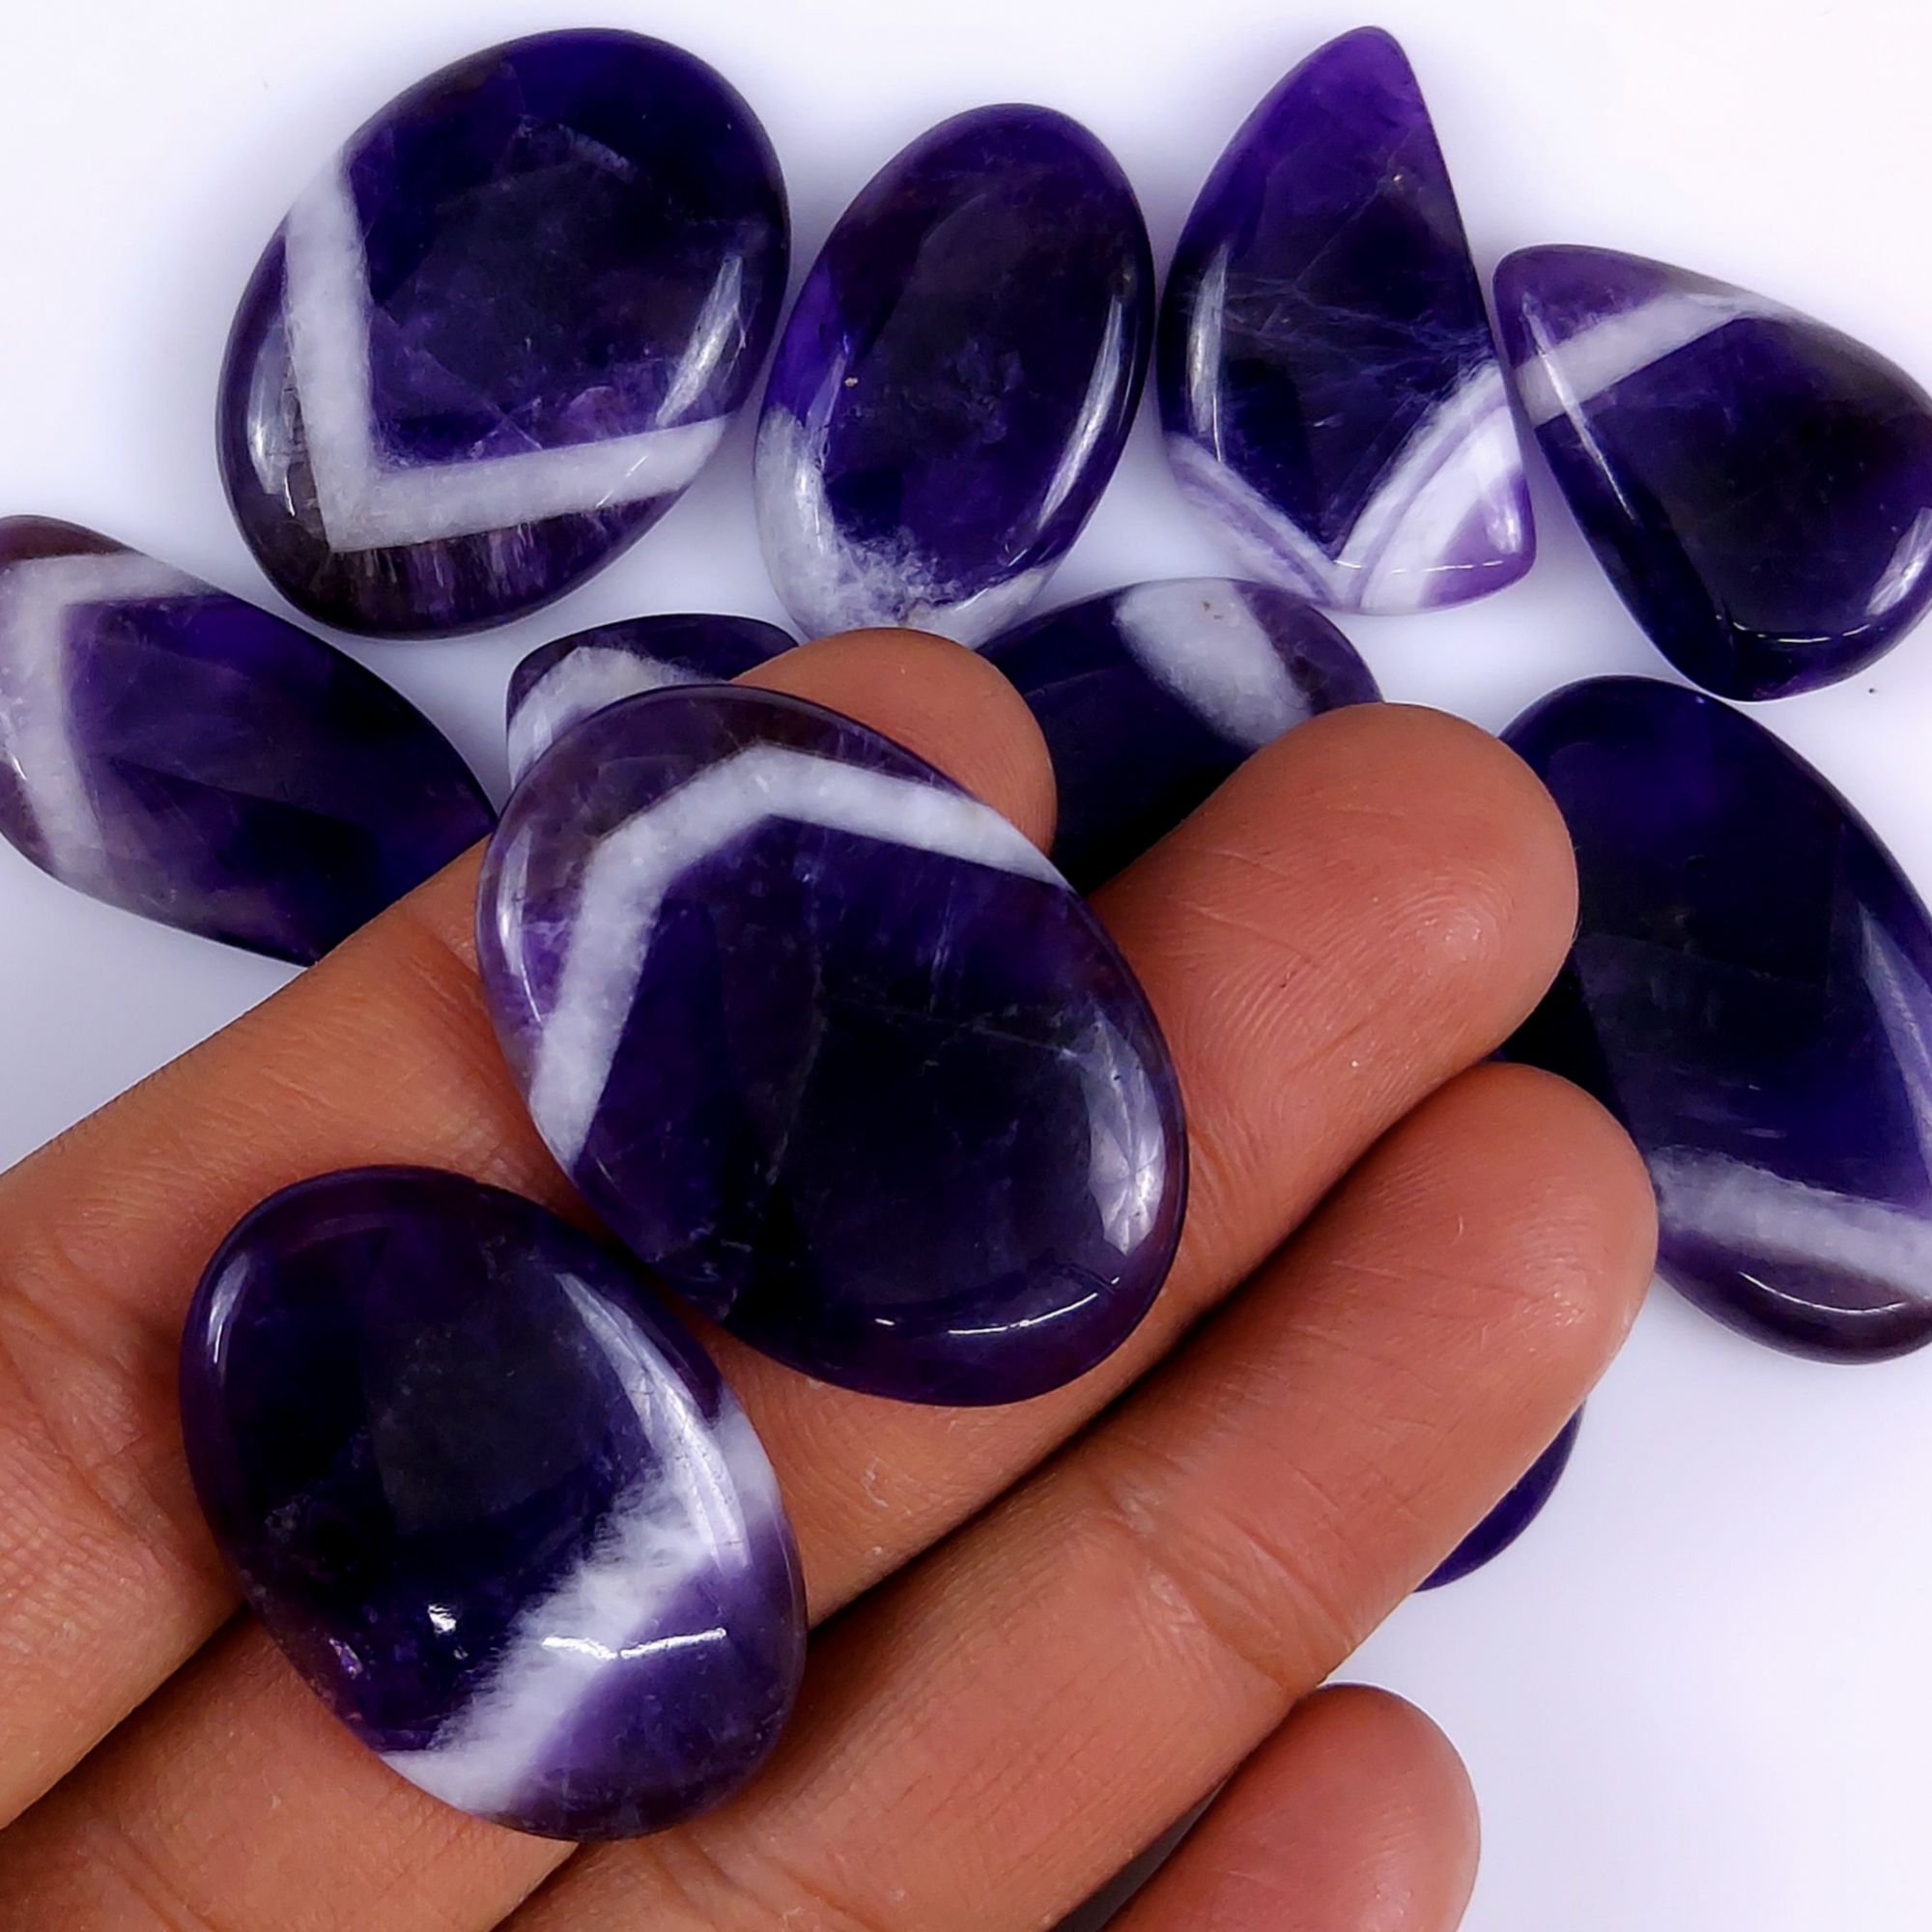 11Pcs 312Cts Natural Amethyst Cabochon lot Gemstone Purple Crystal Mix Shape Loose Gemstone beads for jewelry Making 34x22 22x15mm#7514